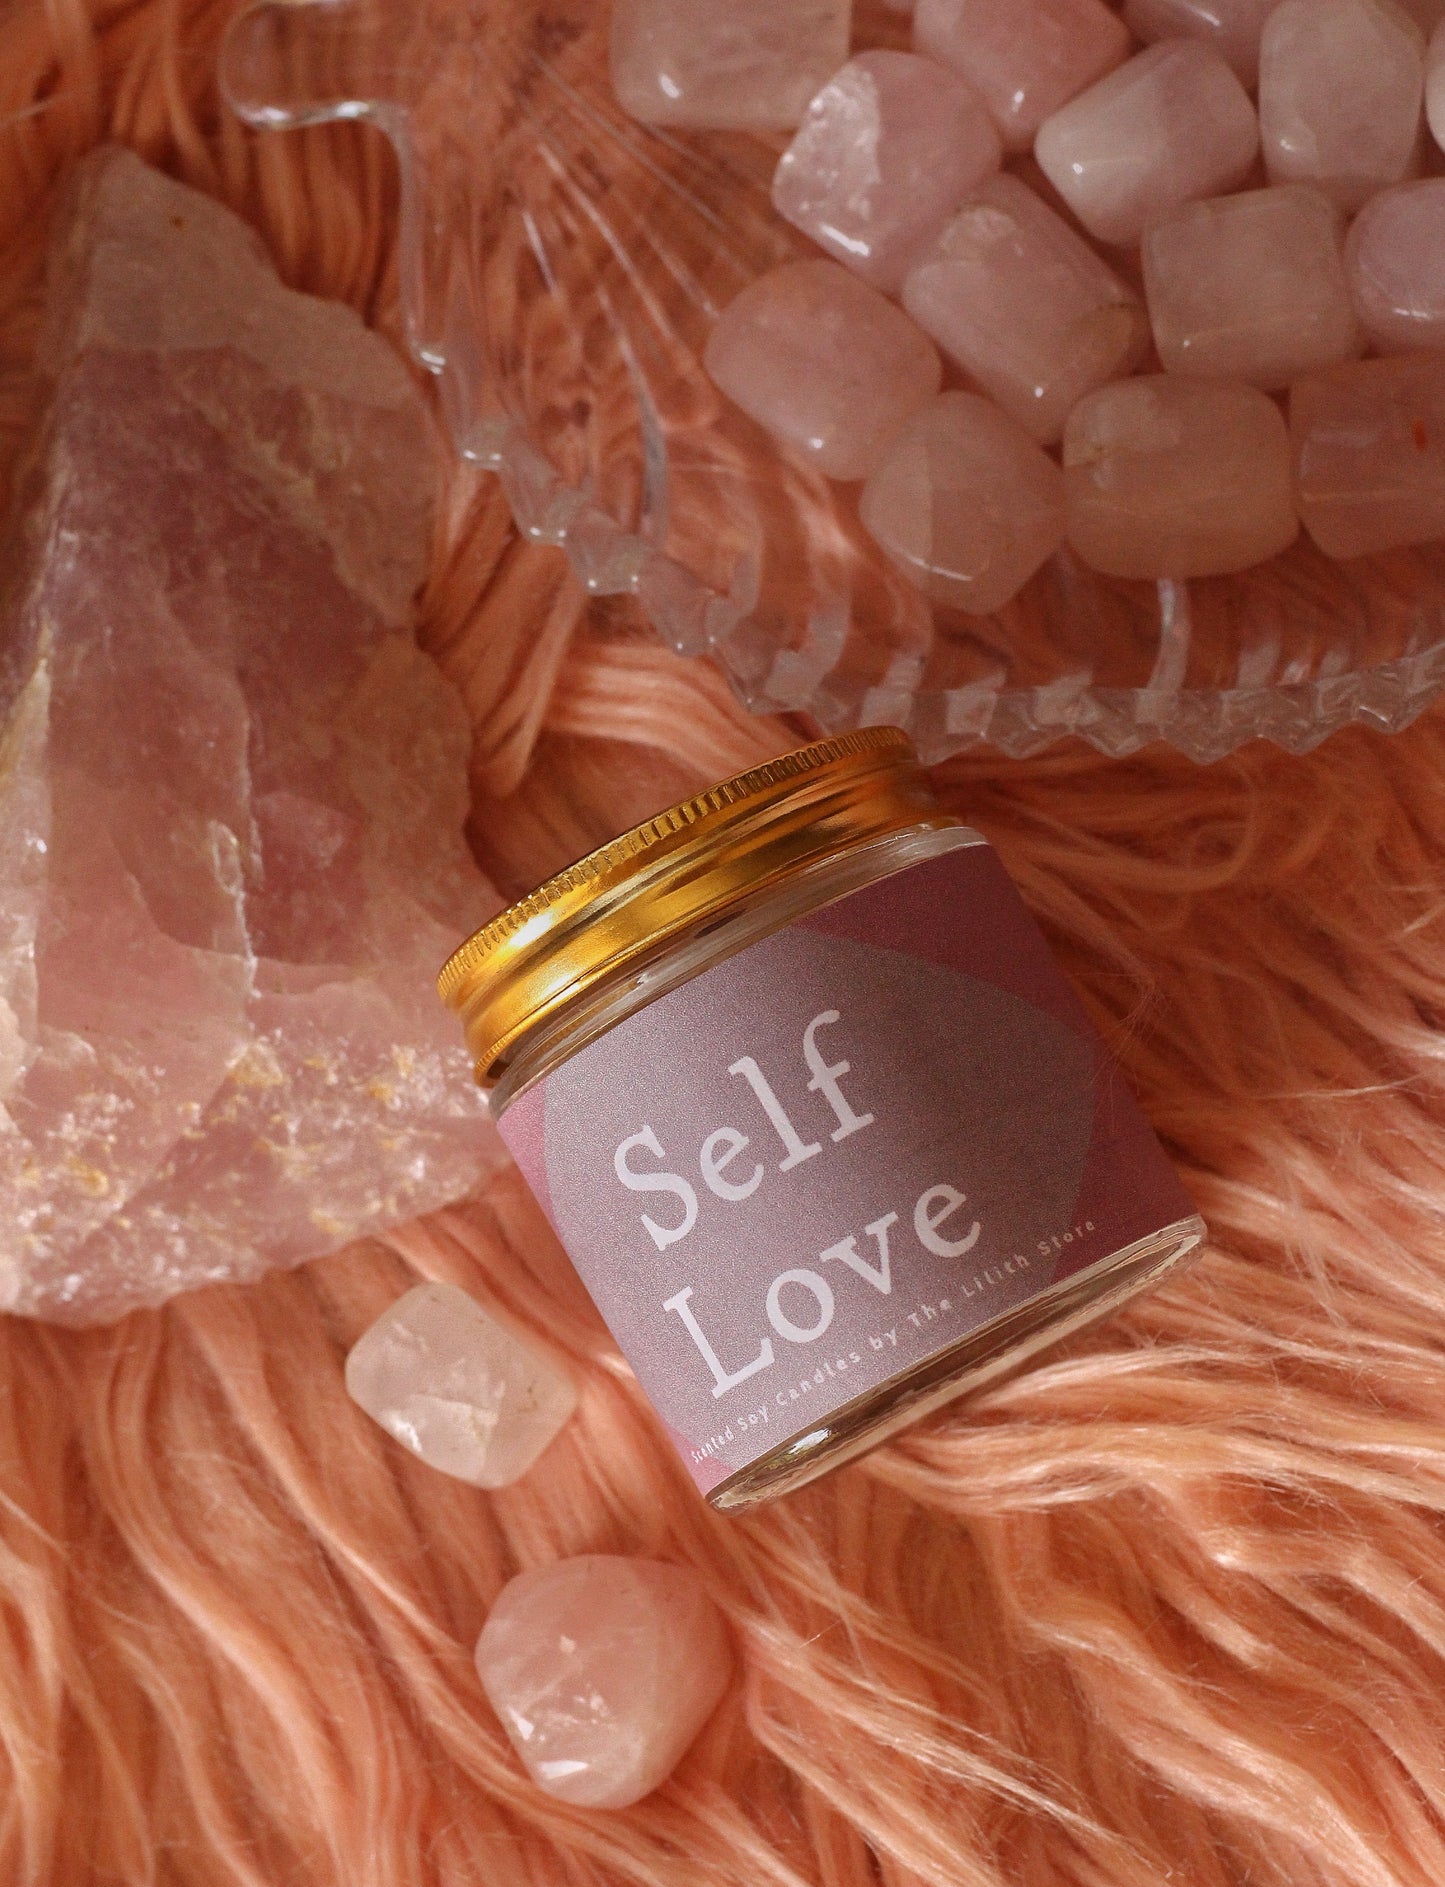 Self Love Scented Soy Candle